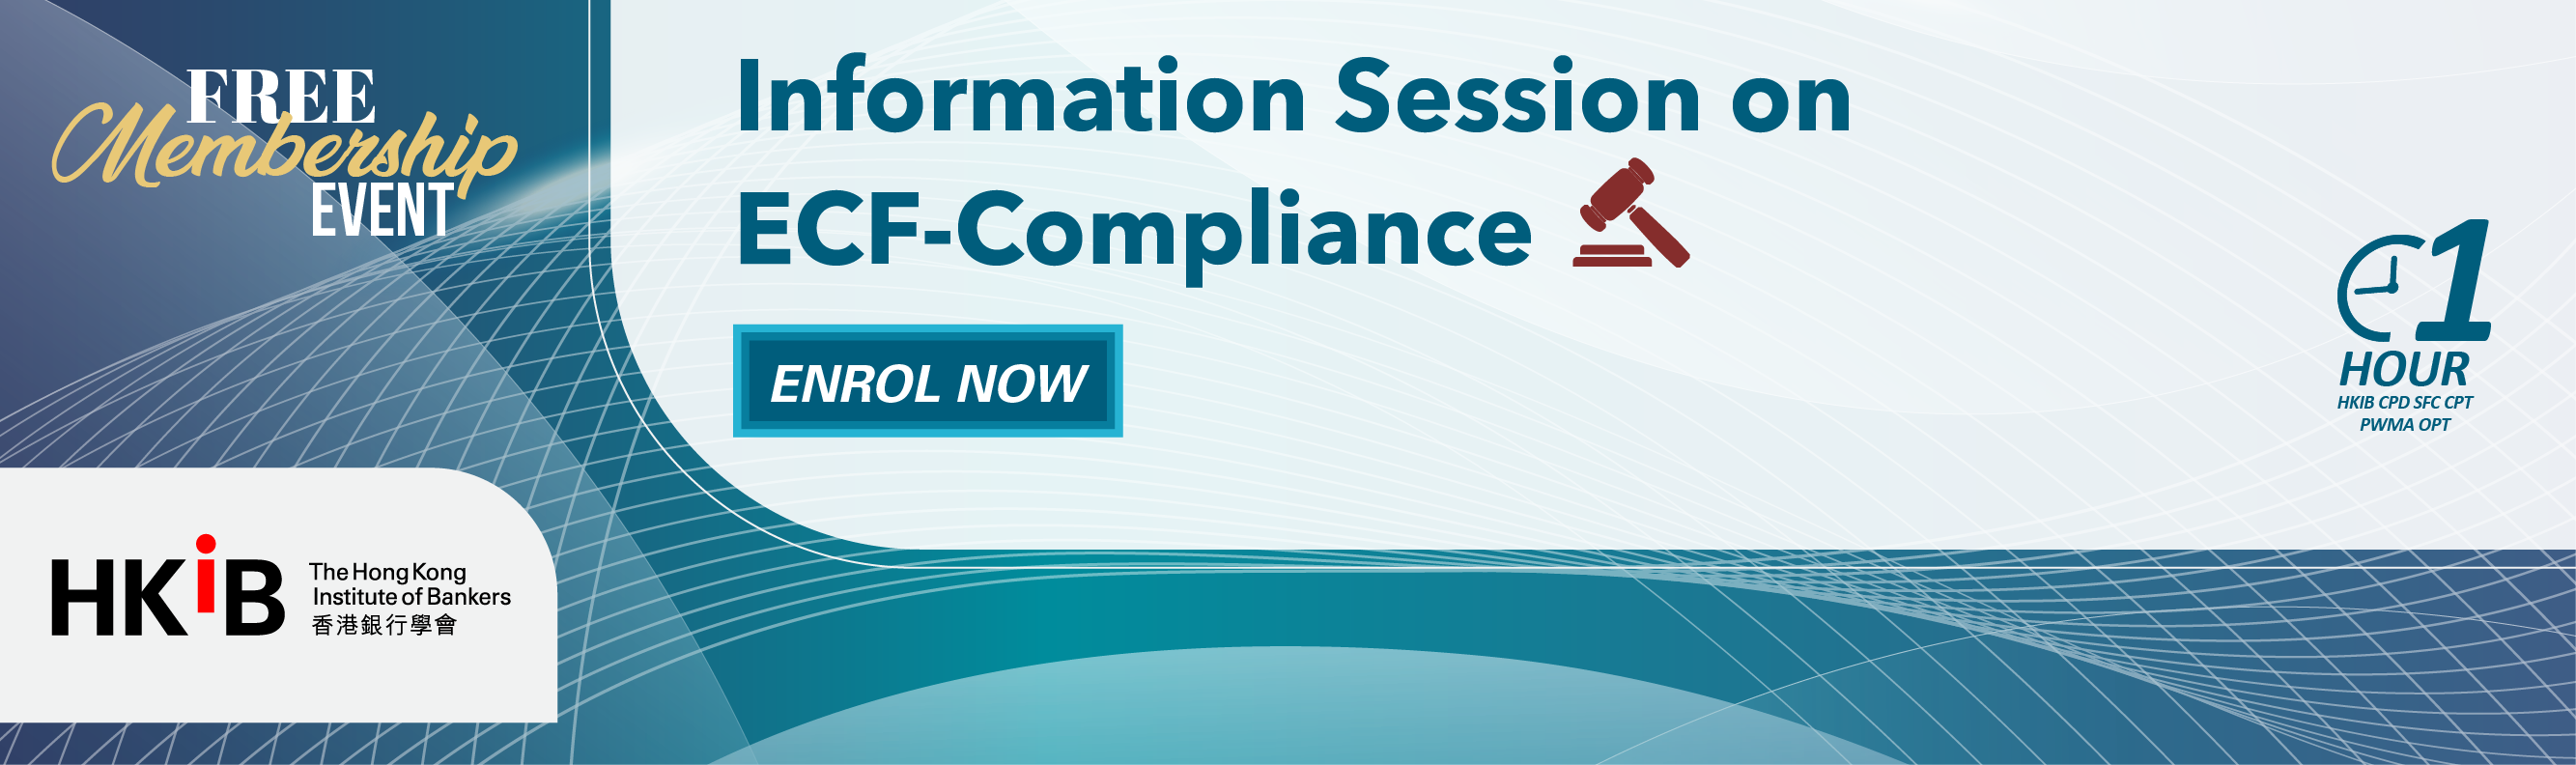 Information Session on ECF-Compliance (Professional level)